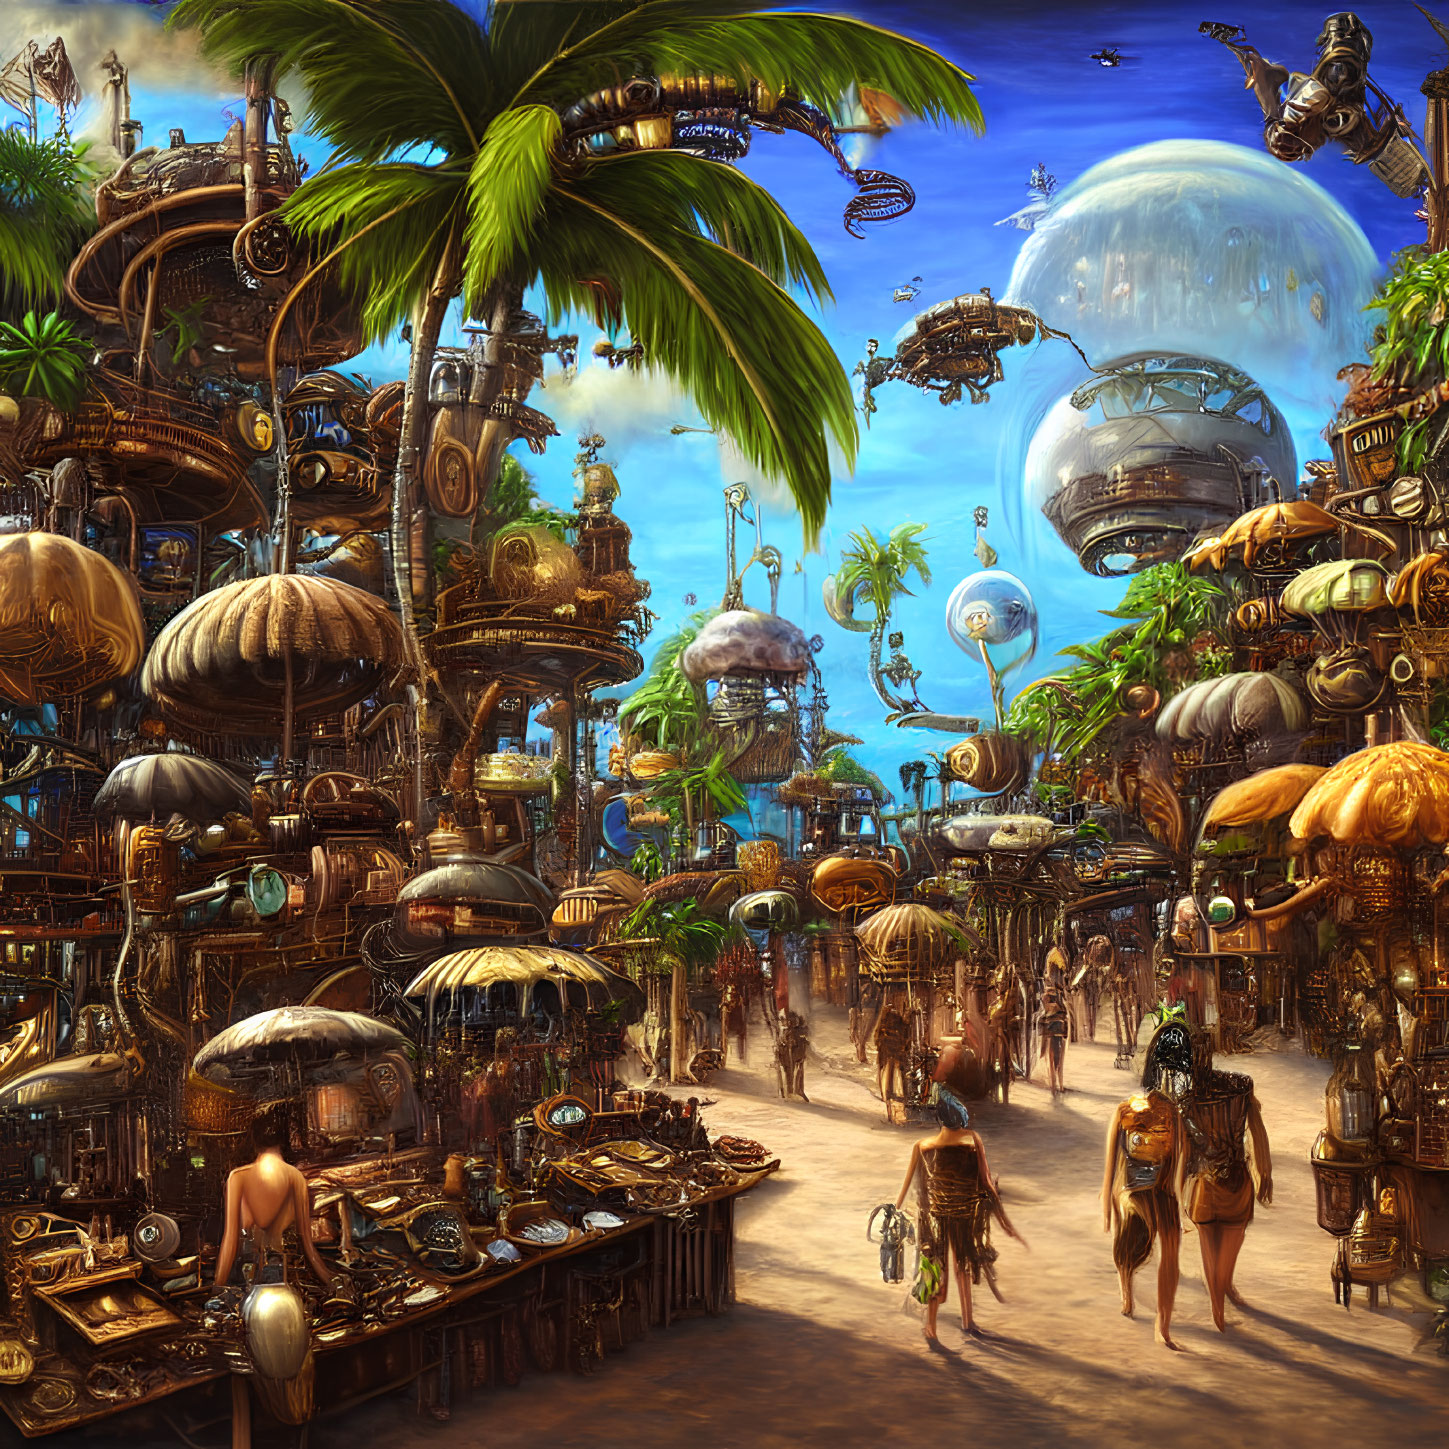 Steampunk marketplace with floating orbs, tropical trees, intricate machinery, and diverse attire.